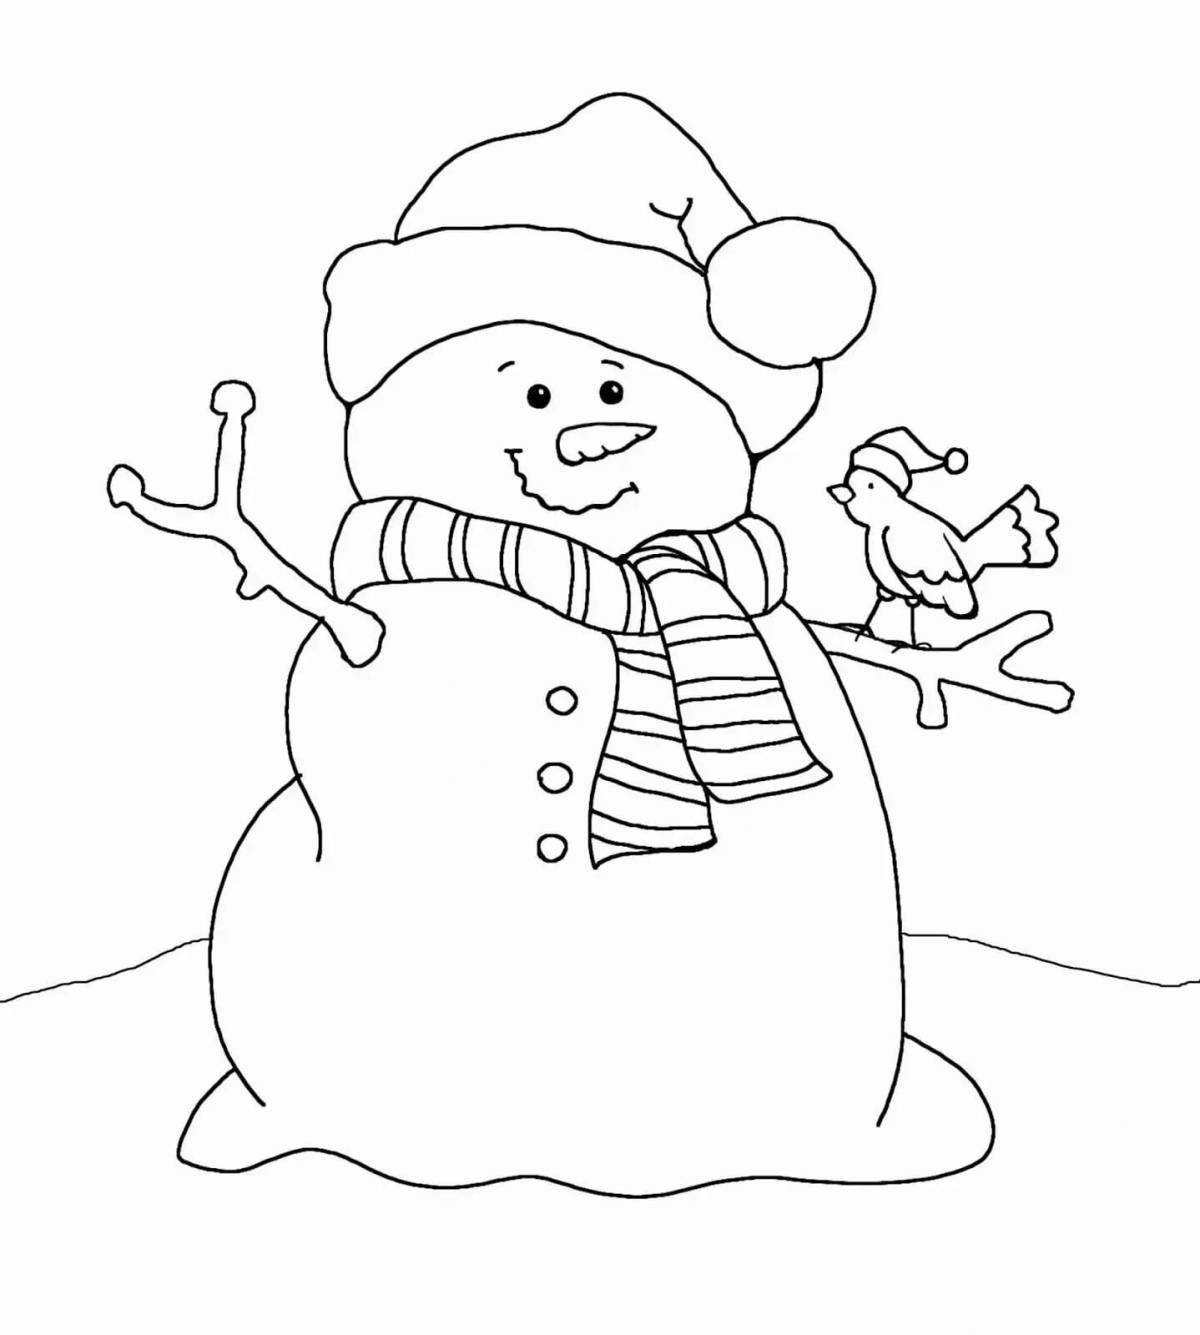 Live coloring funny snowmen for kids